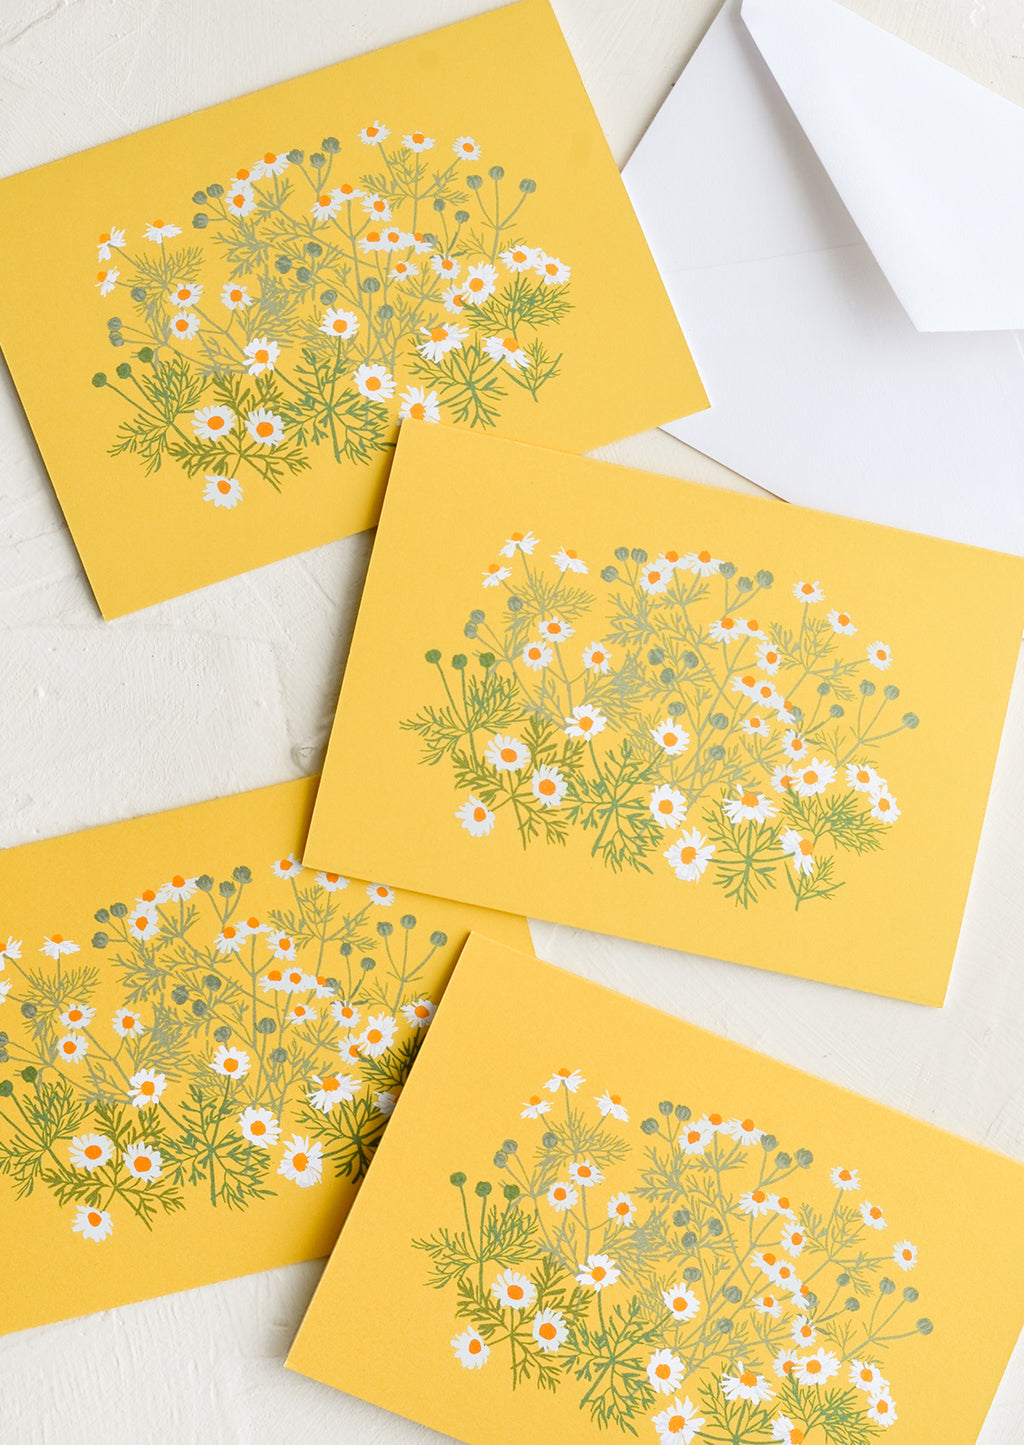 Chamomile: A set of yellow cards with chamomile floral print.